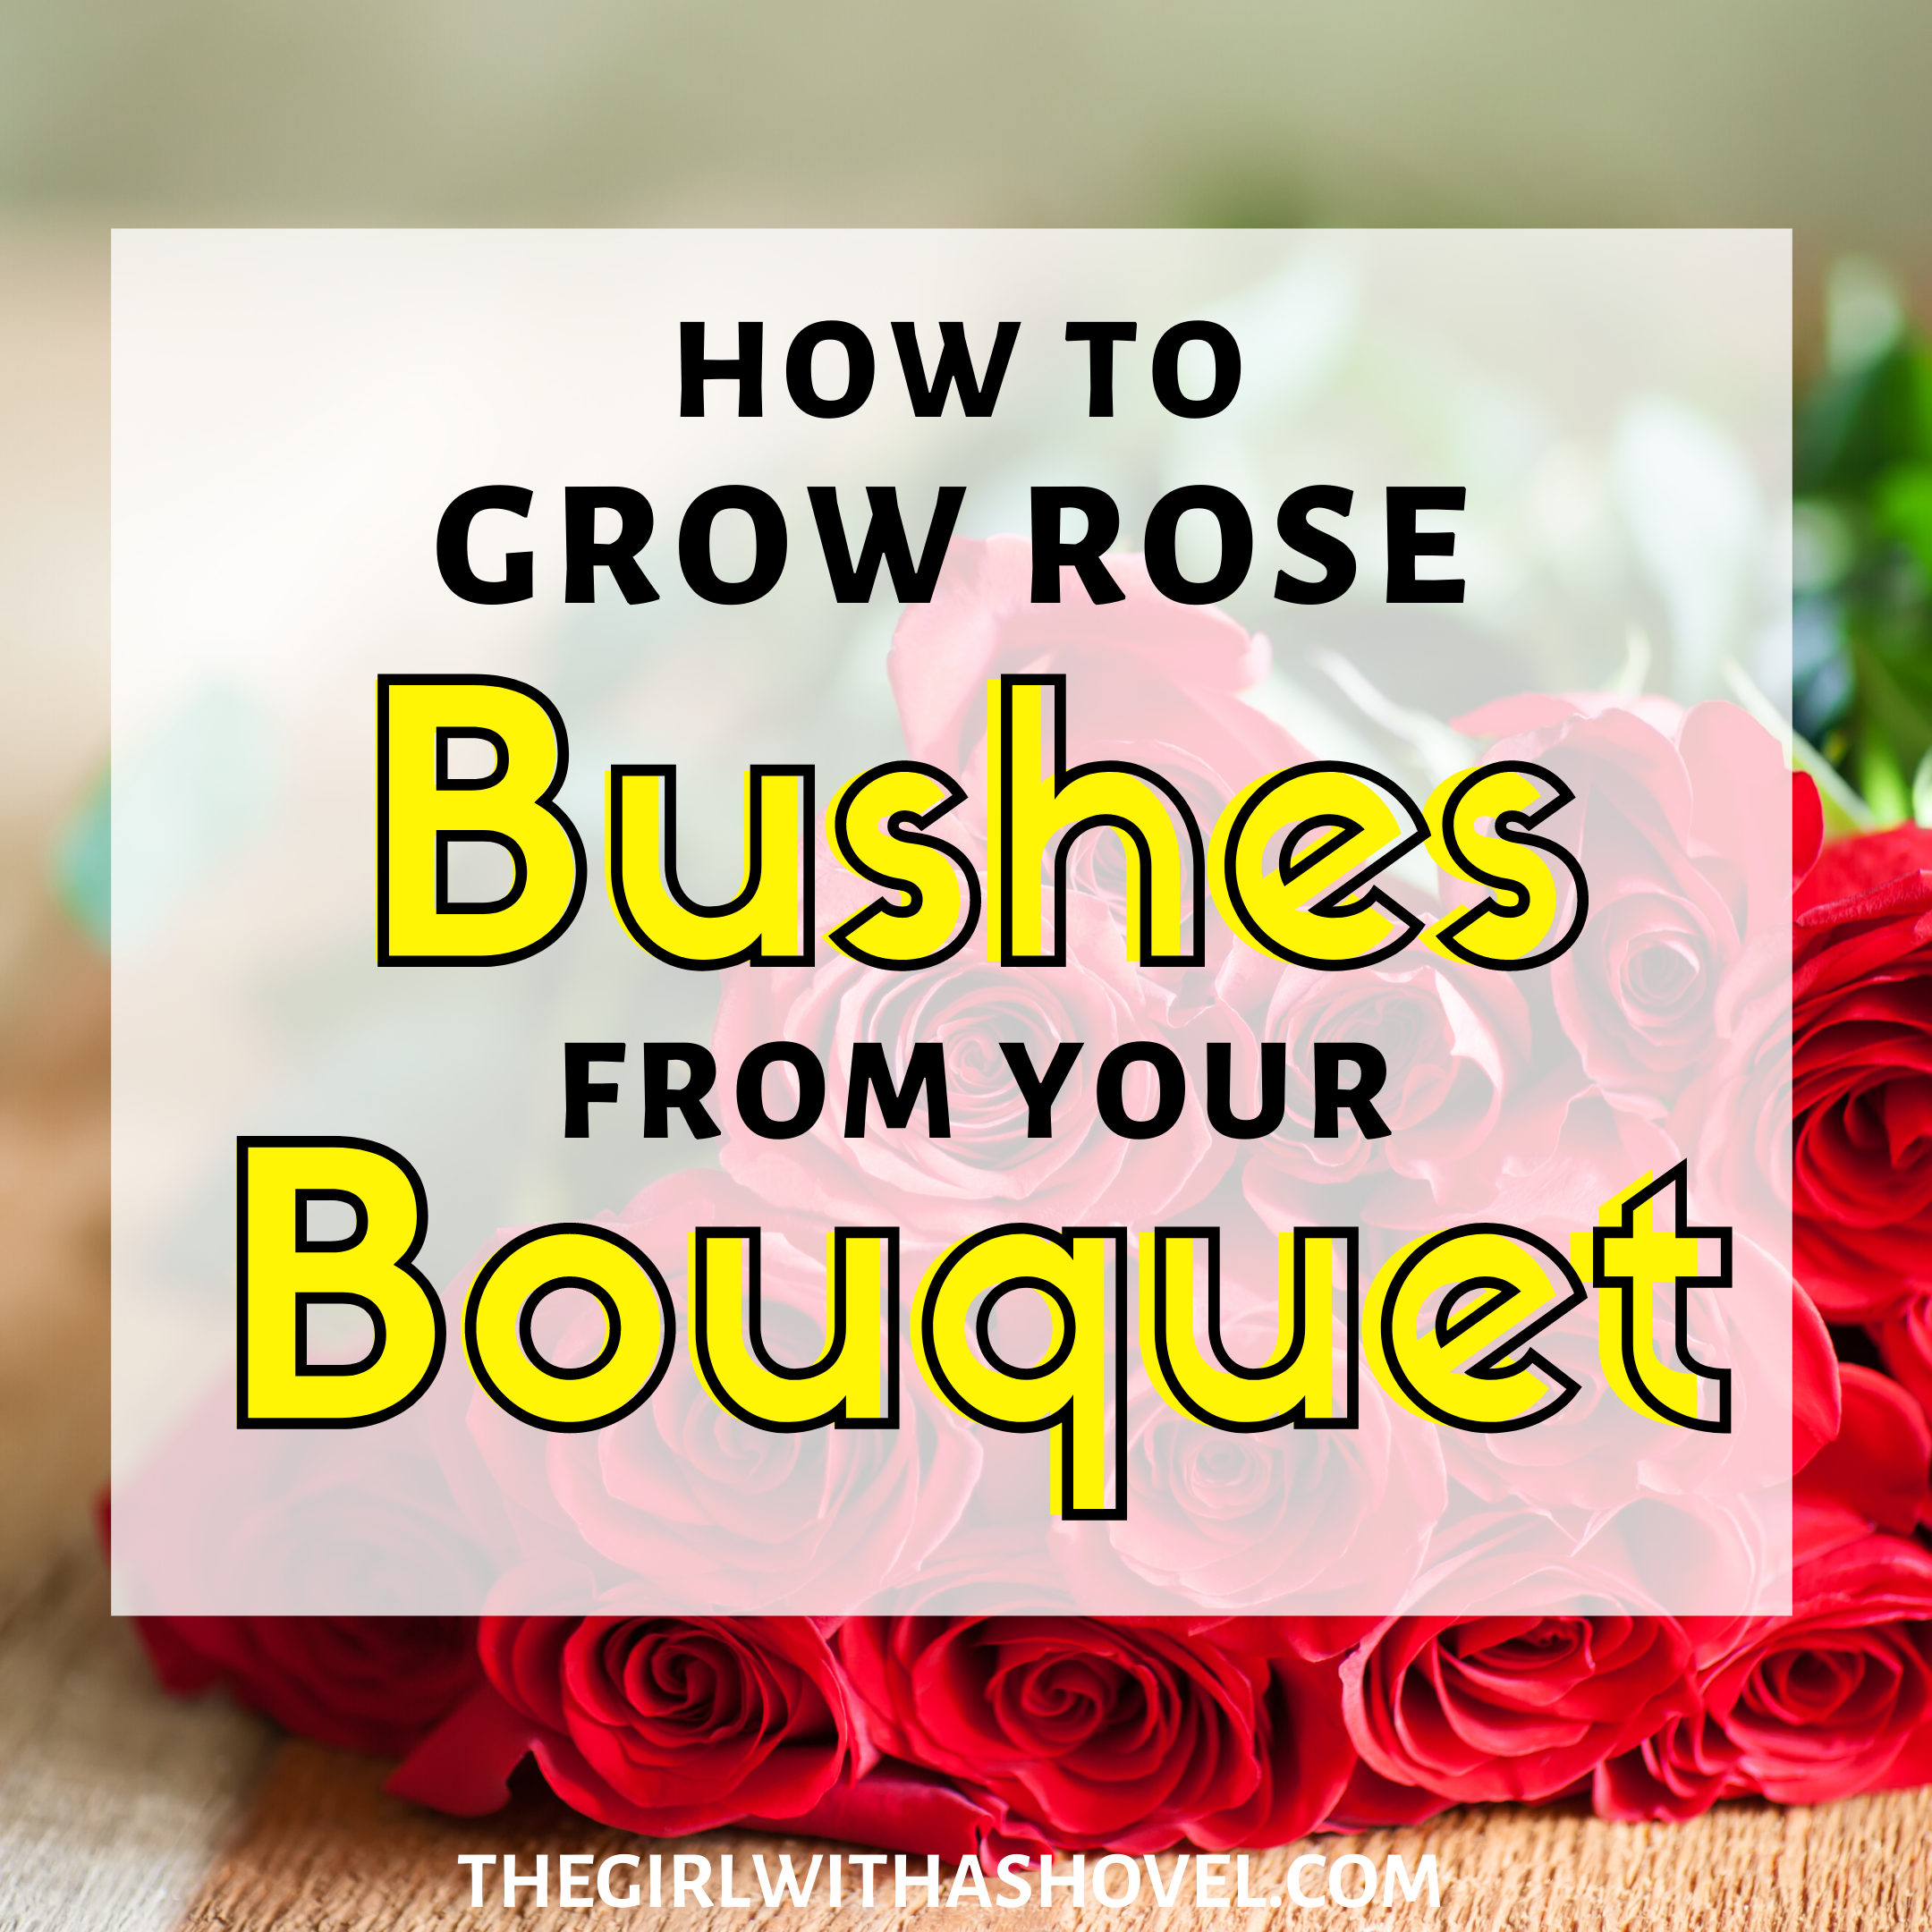 3 Simple Steps to Grow Roses from Cut Flowers